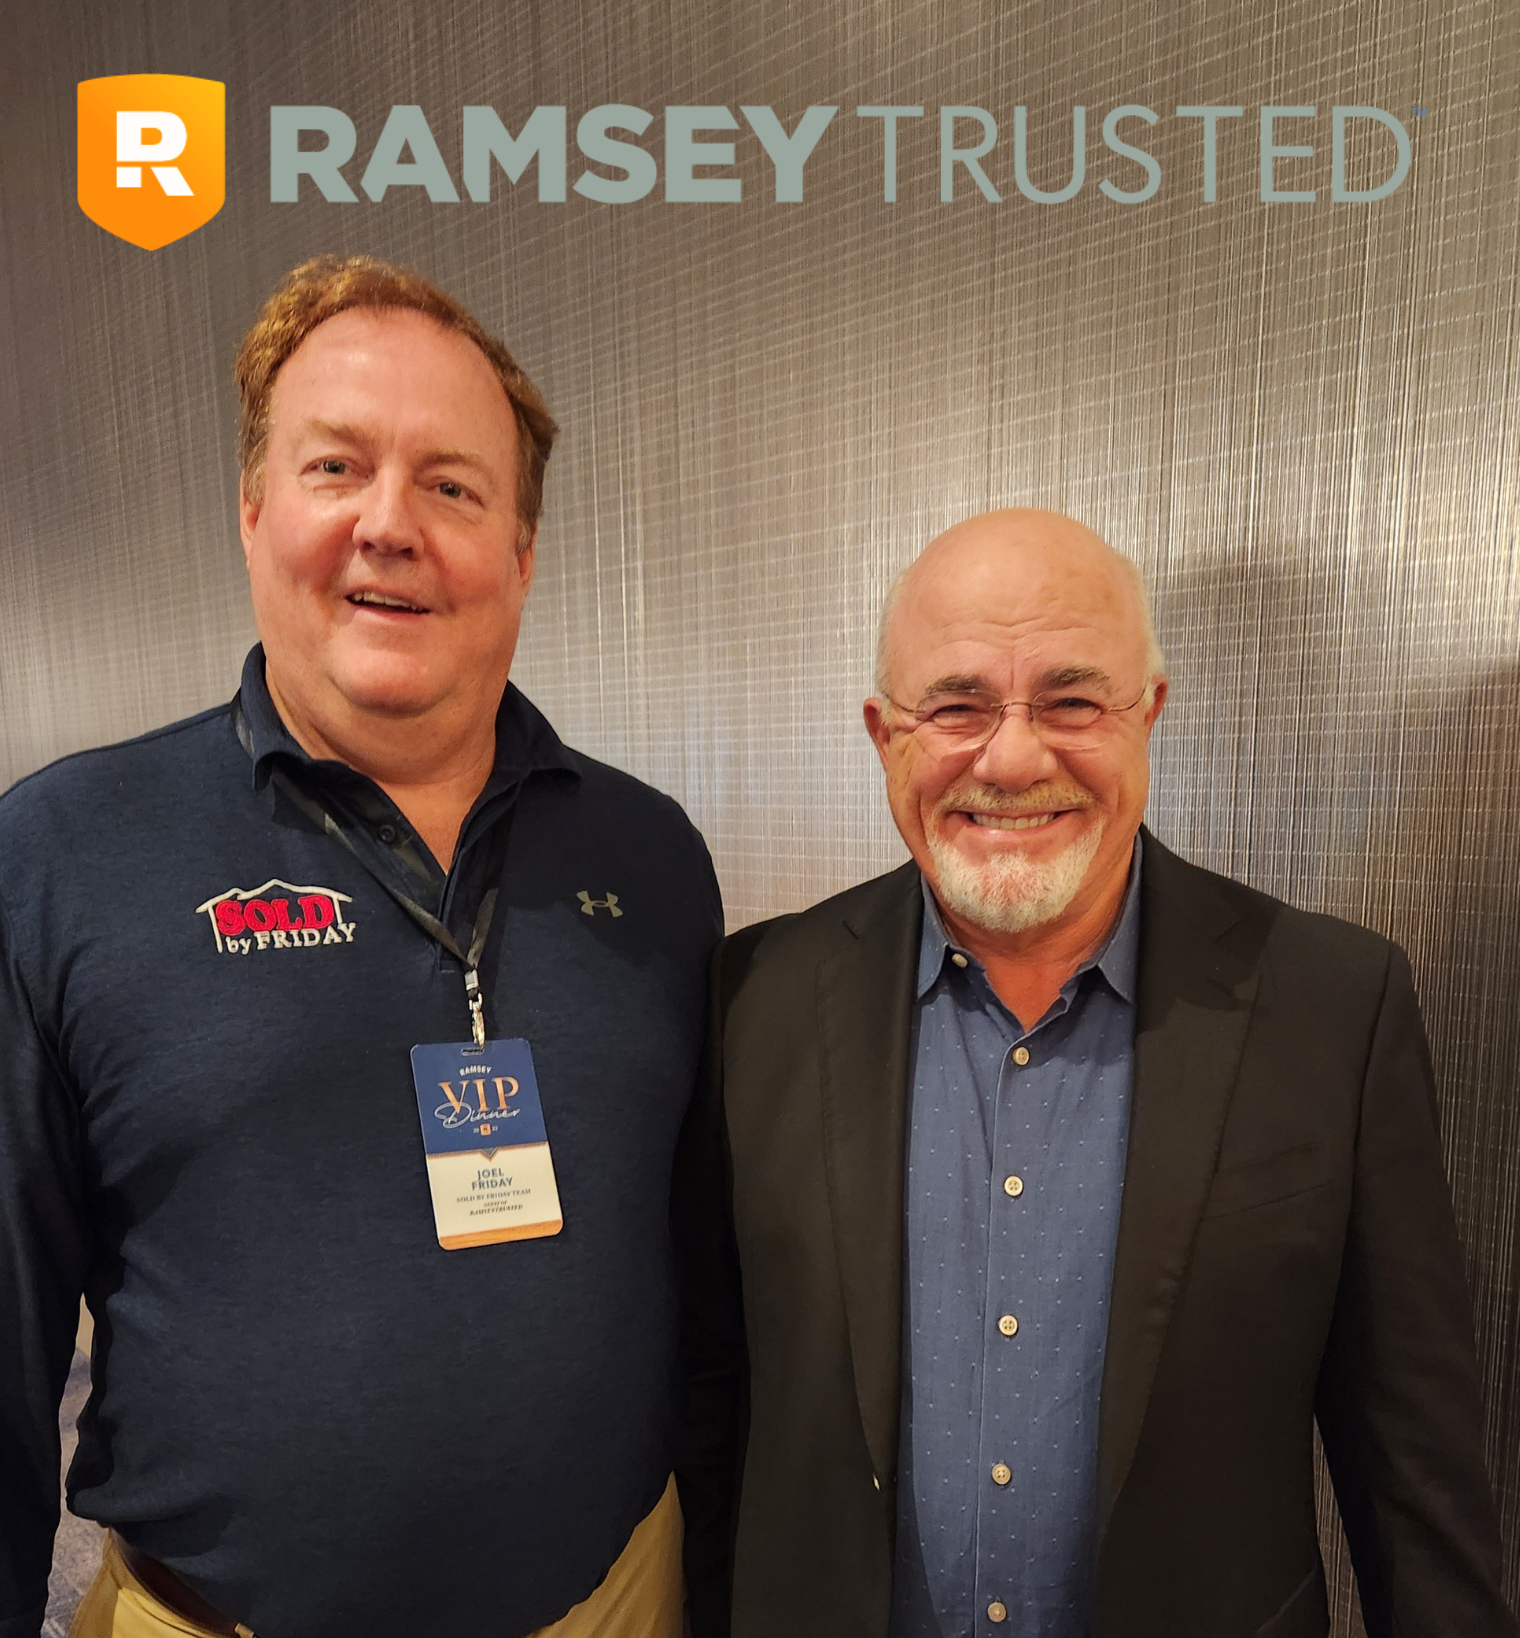 Dave Ramsey and Joel Friday your Ramsey Trusted realtor